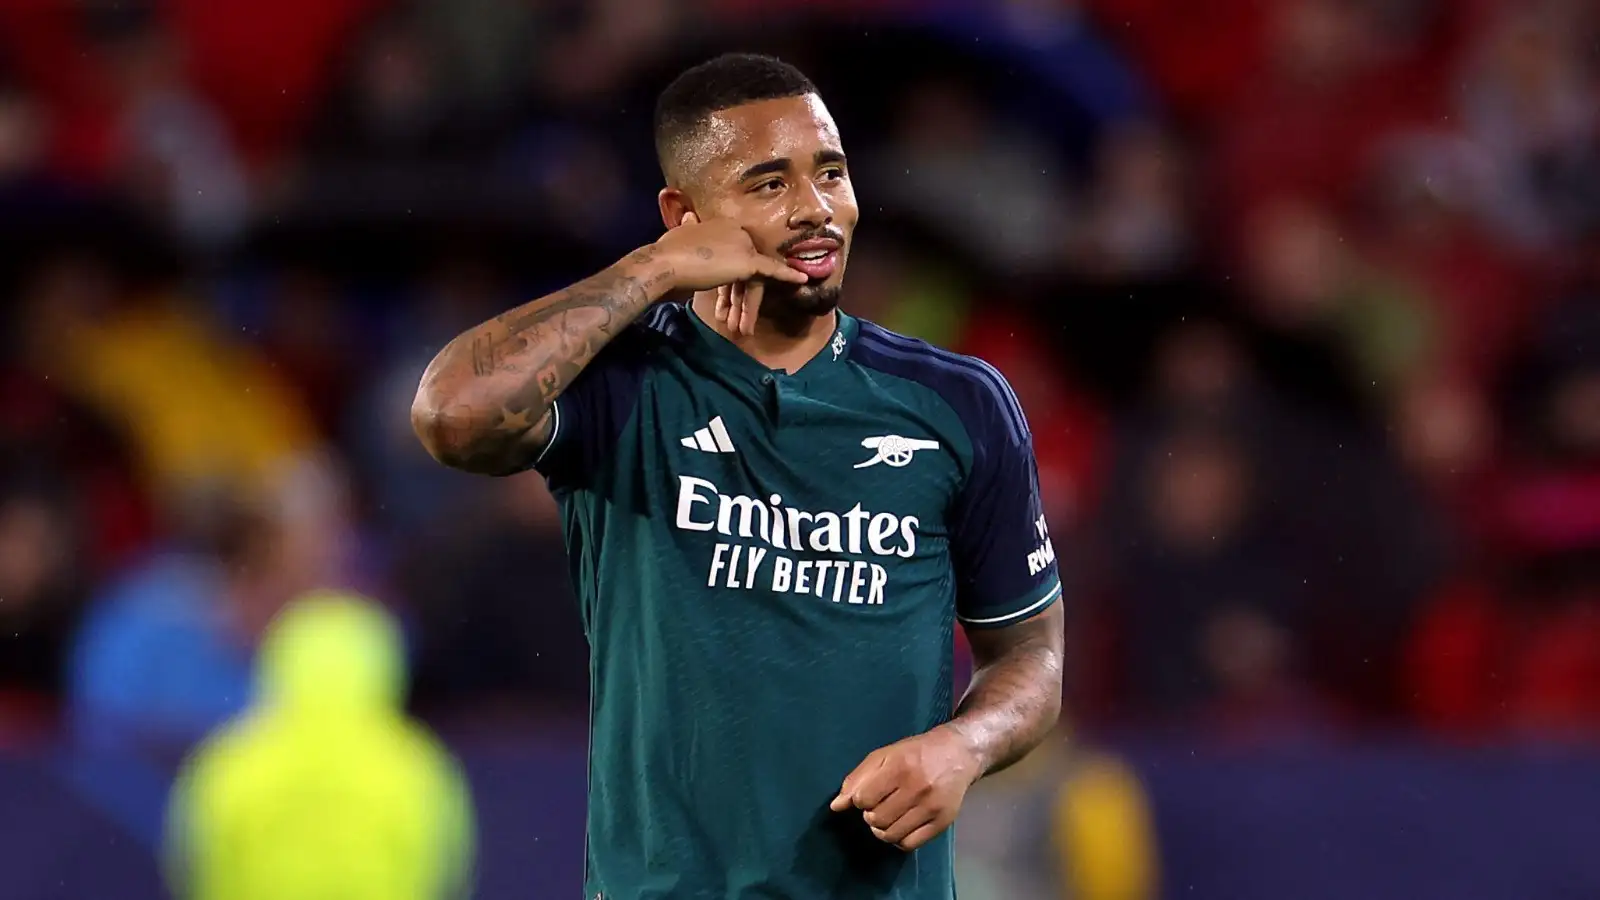 Is that you, Thierry? Gabriel Jesus sent Sergio Ramos back to 2006 with his Sevilla masterclass